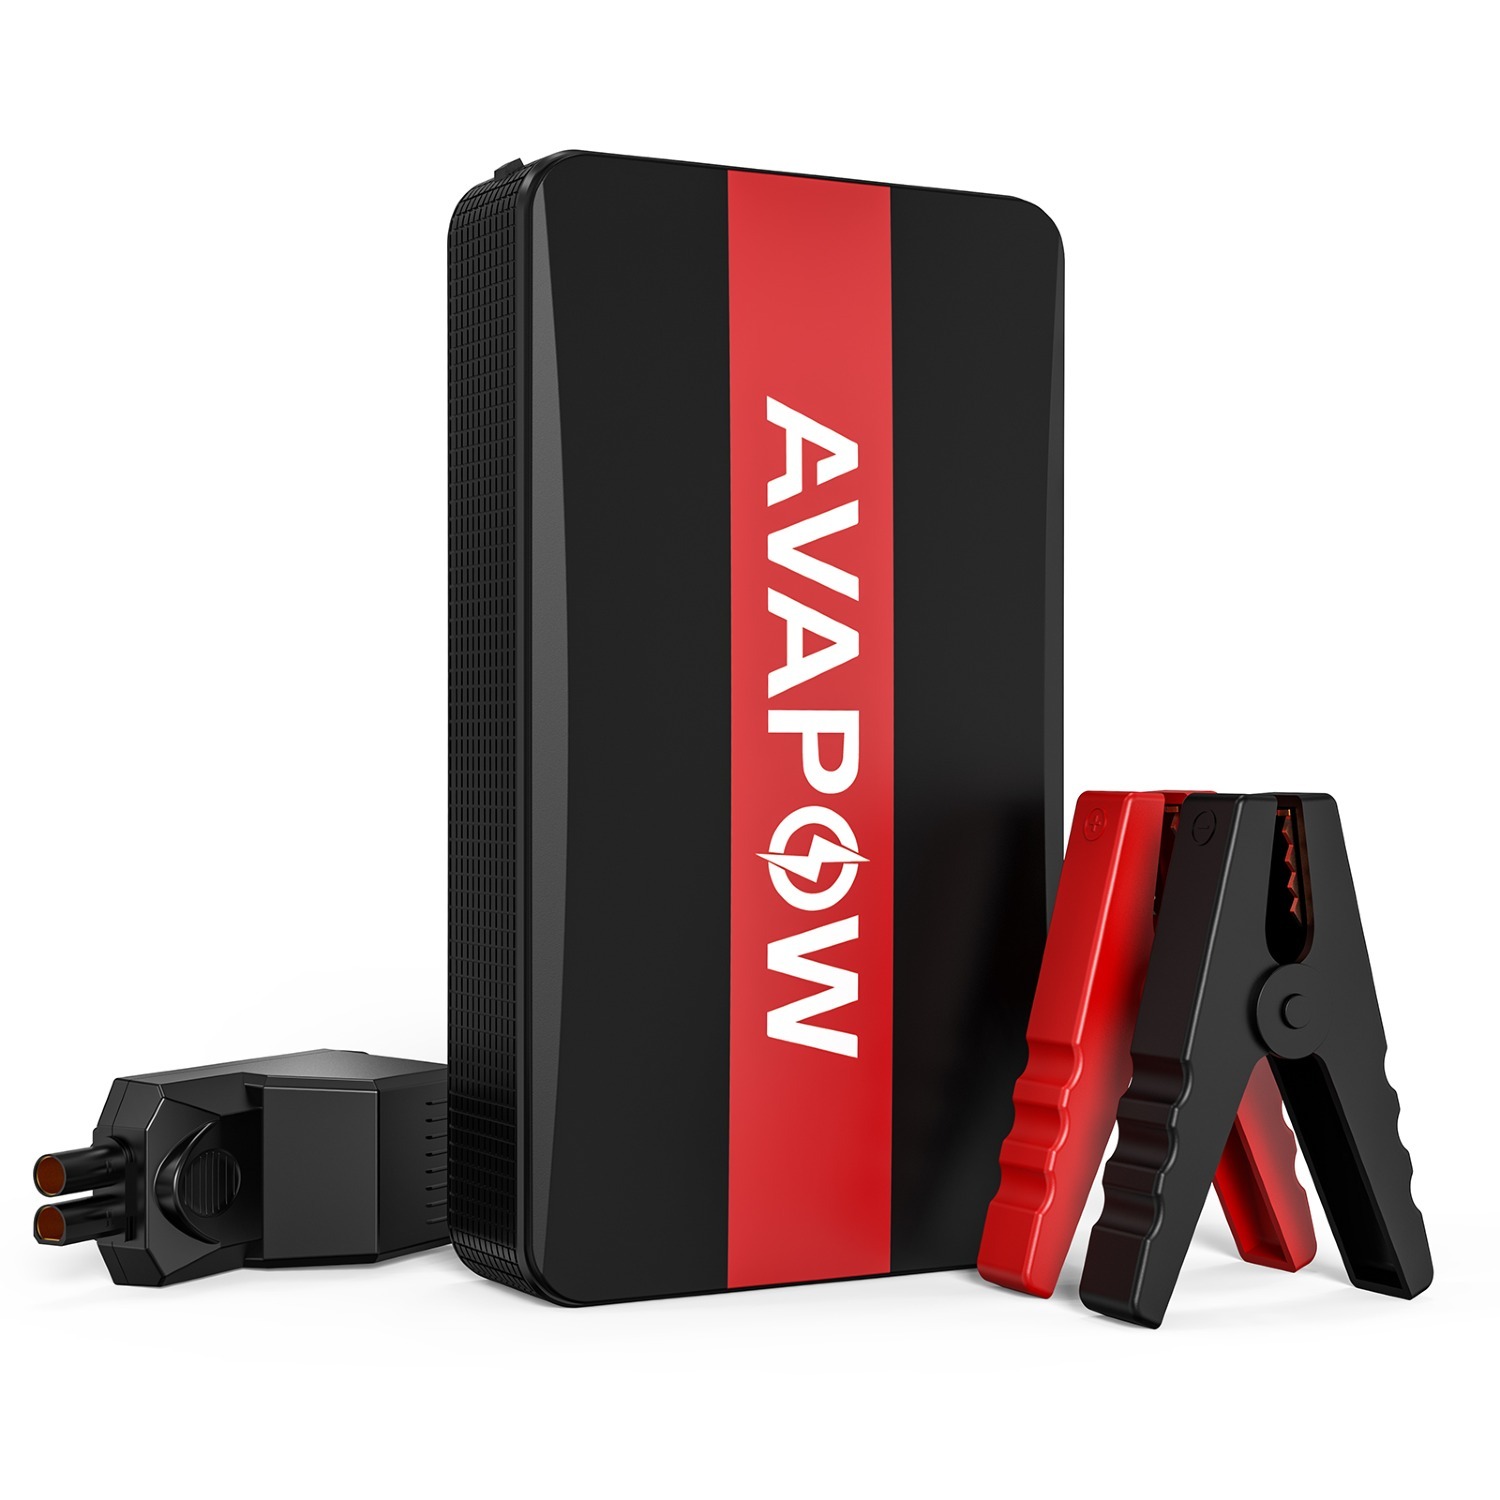 AVAPOW 1000A Peak 12V Battery Jump Starter Booster Pack $25 + Free Shipping w/ Walmart+ or orders $35+ $24.99